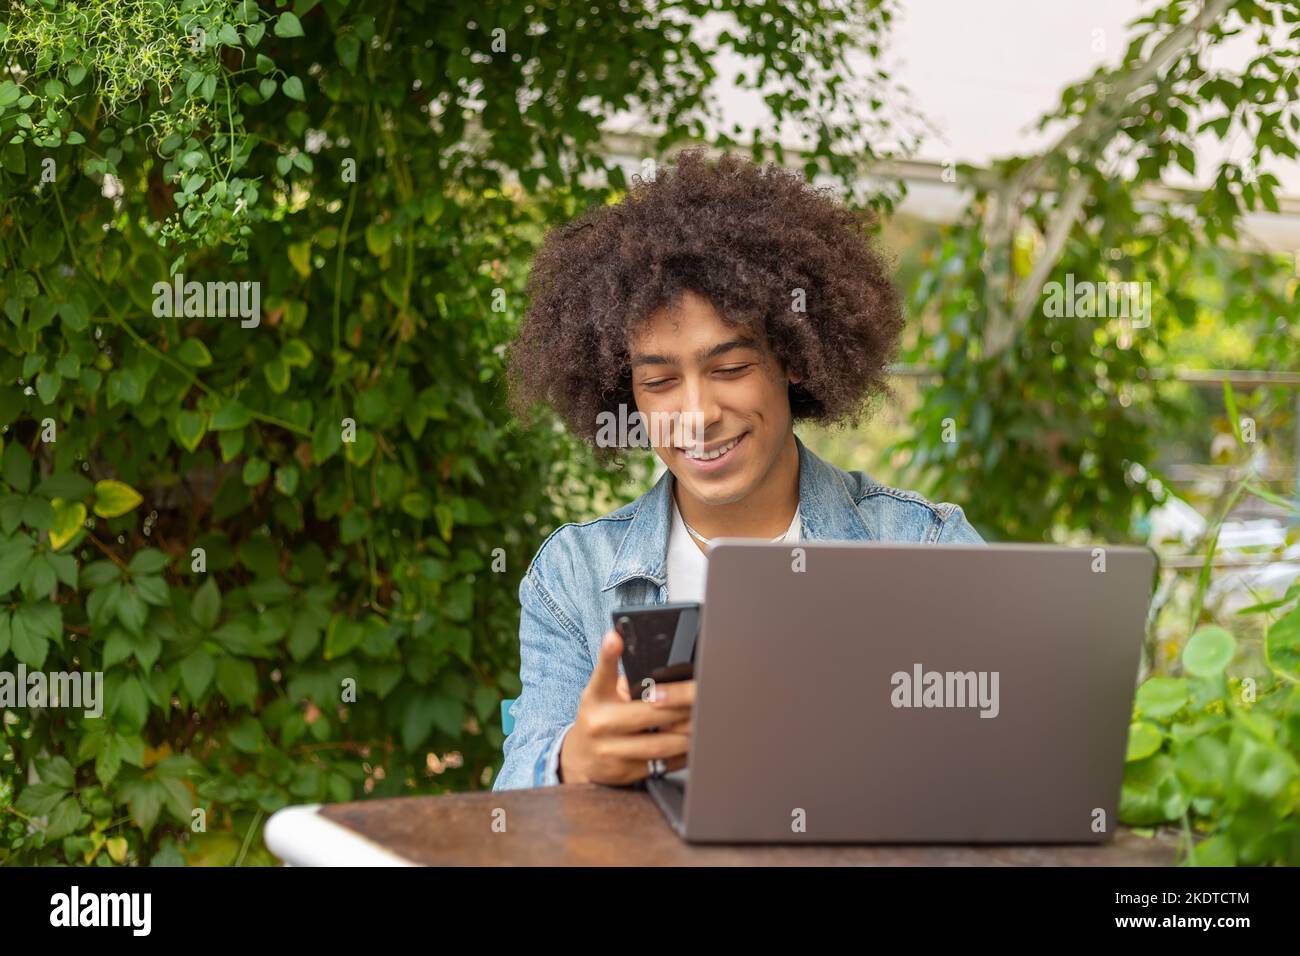 Smiling young ethnic Afro-Italian man 20 years old, dressed in casual clothes, works on a laptop outdoors, in a green area in nature. Green open space Stock Photo